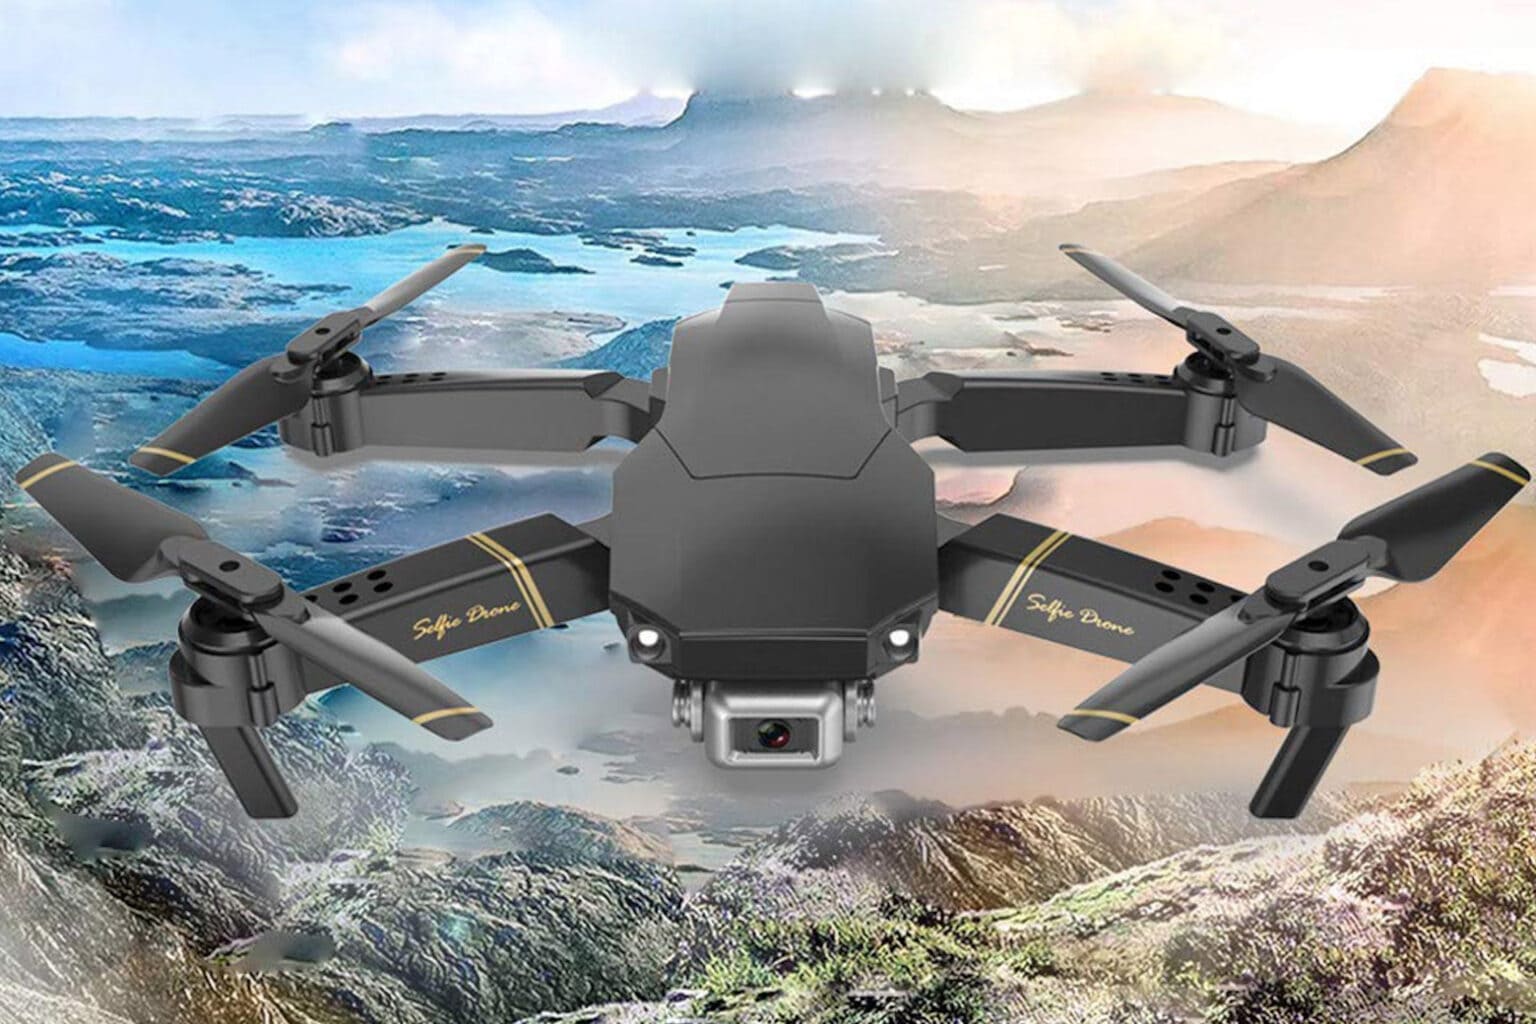 Save over $30 on this versatile drone that captures 4K images.